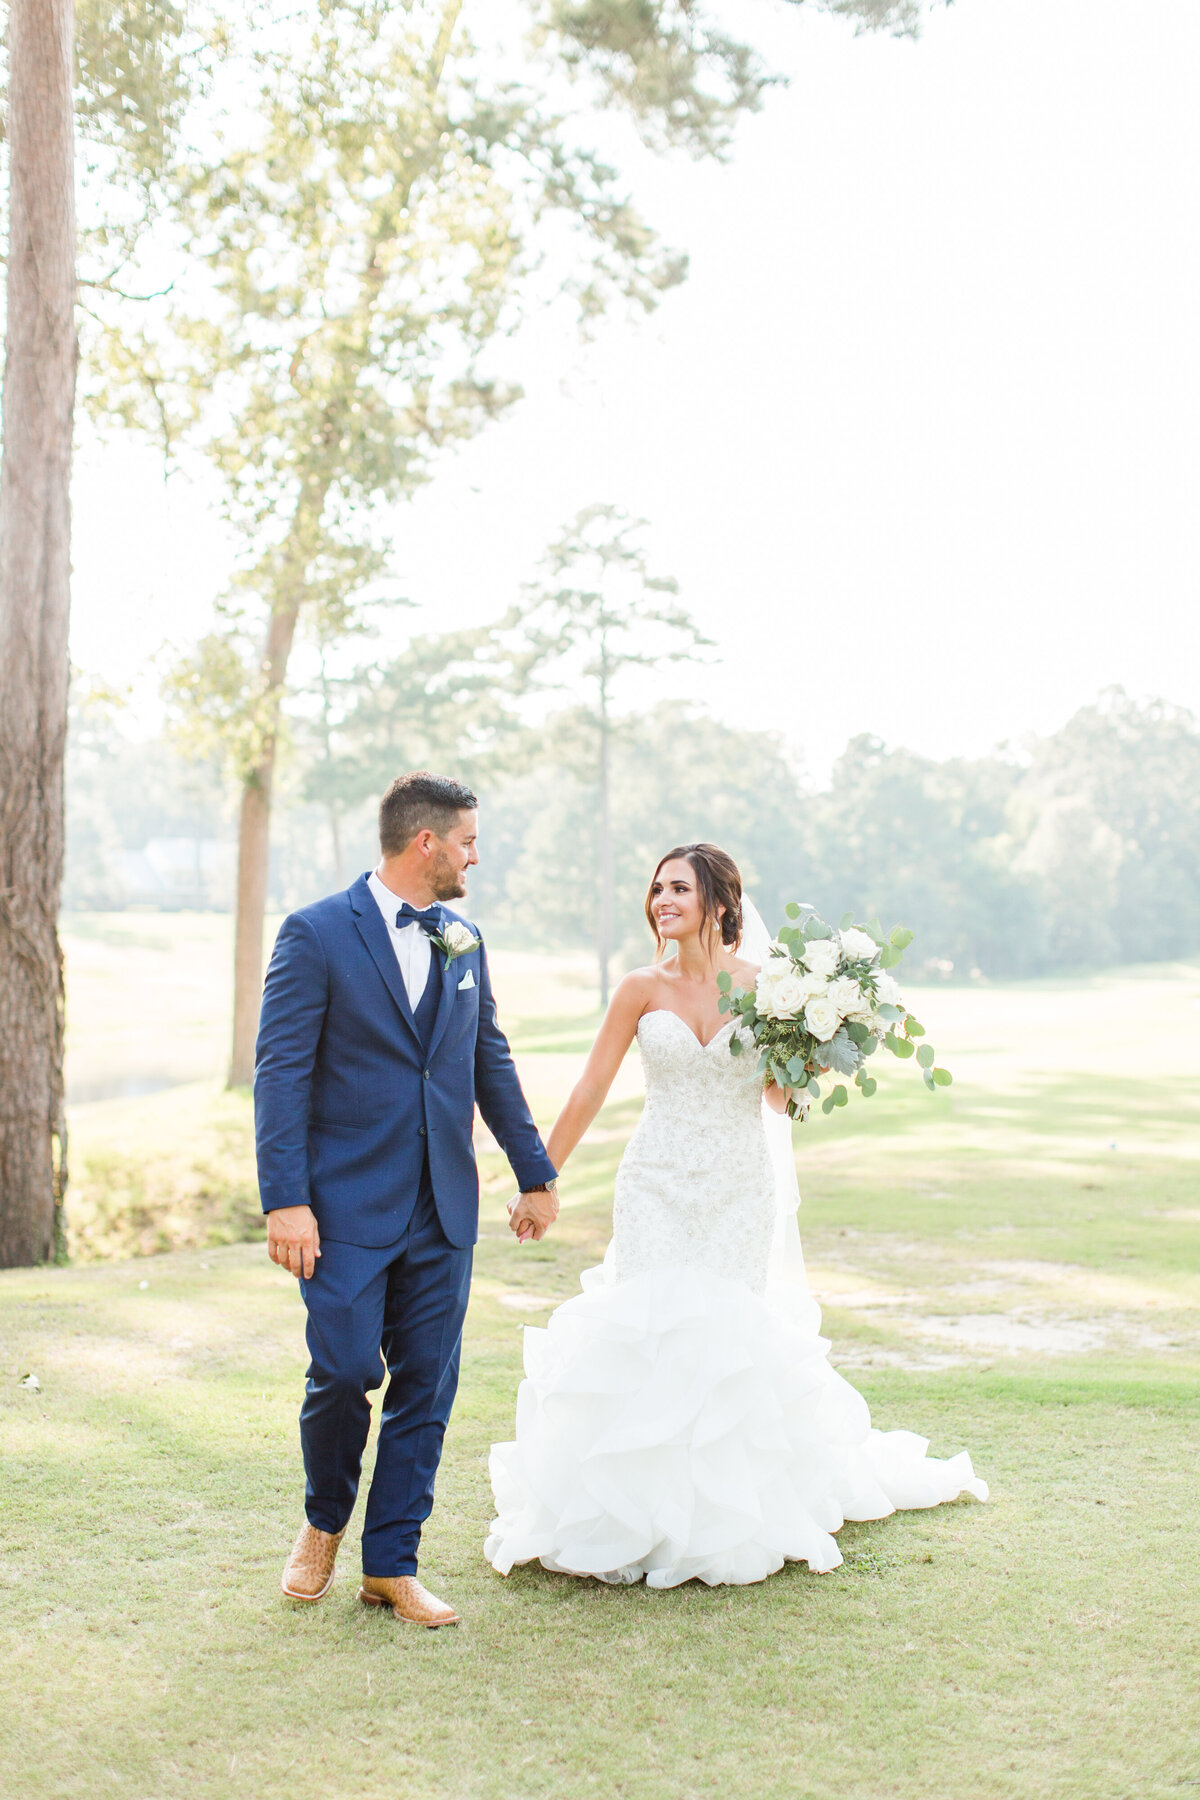 Renee Lorio Photography South Louisiana Wedding Engagement Light Airy Portrait Photographer Photos Southern Clean Colorful1677777